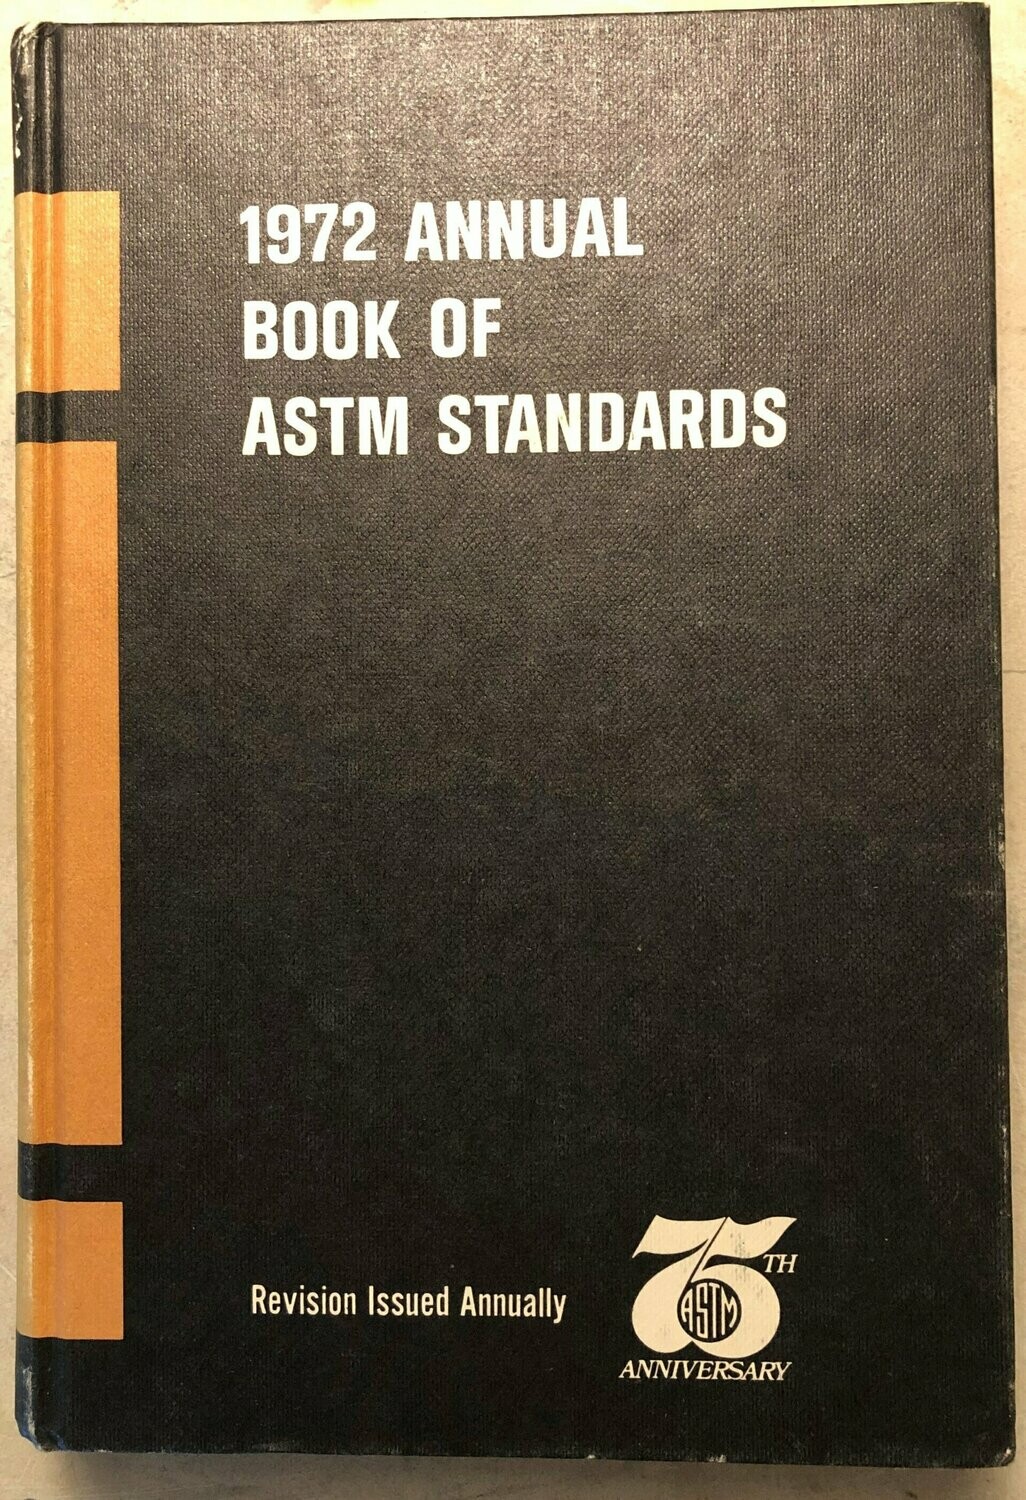 1972 Annual book of astm standards part 1